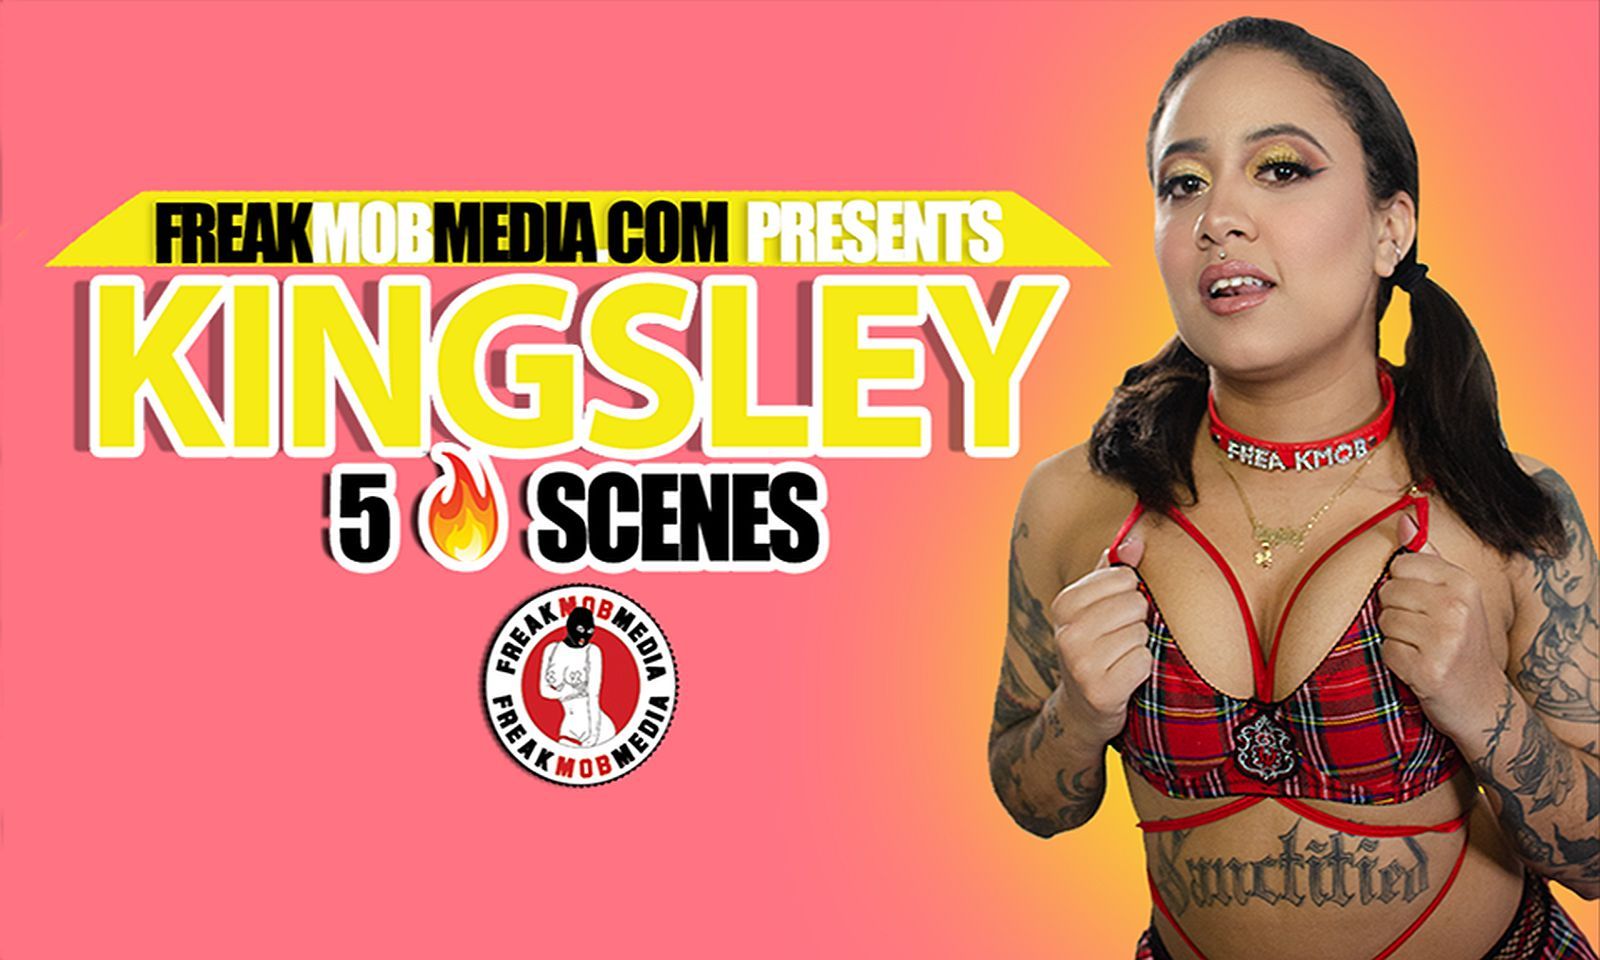 Five-Scene Kingsley Showcase Available Exclusively on DVD